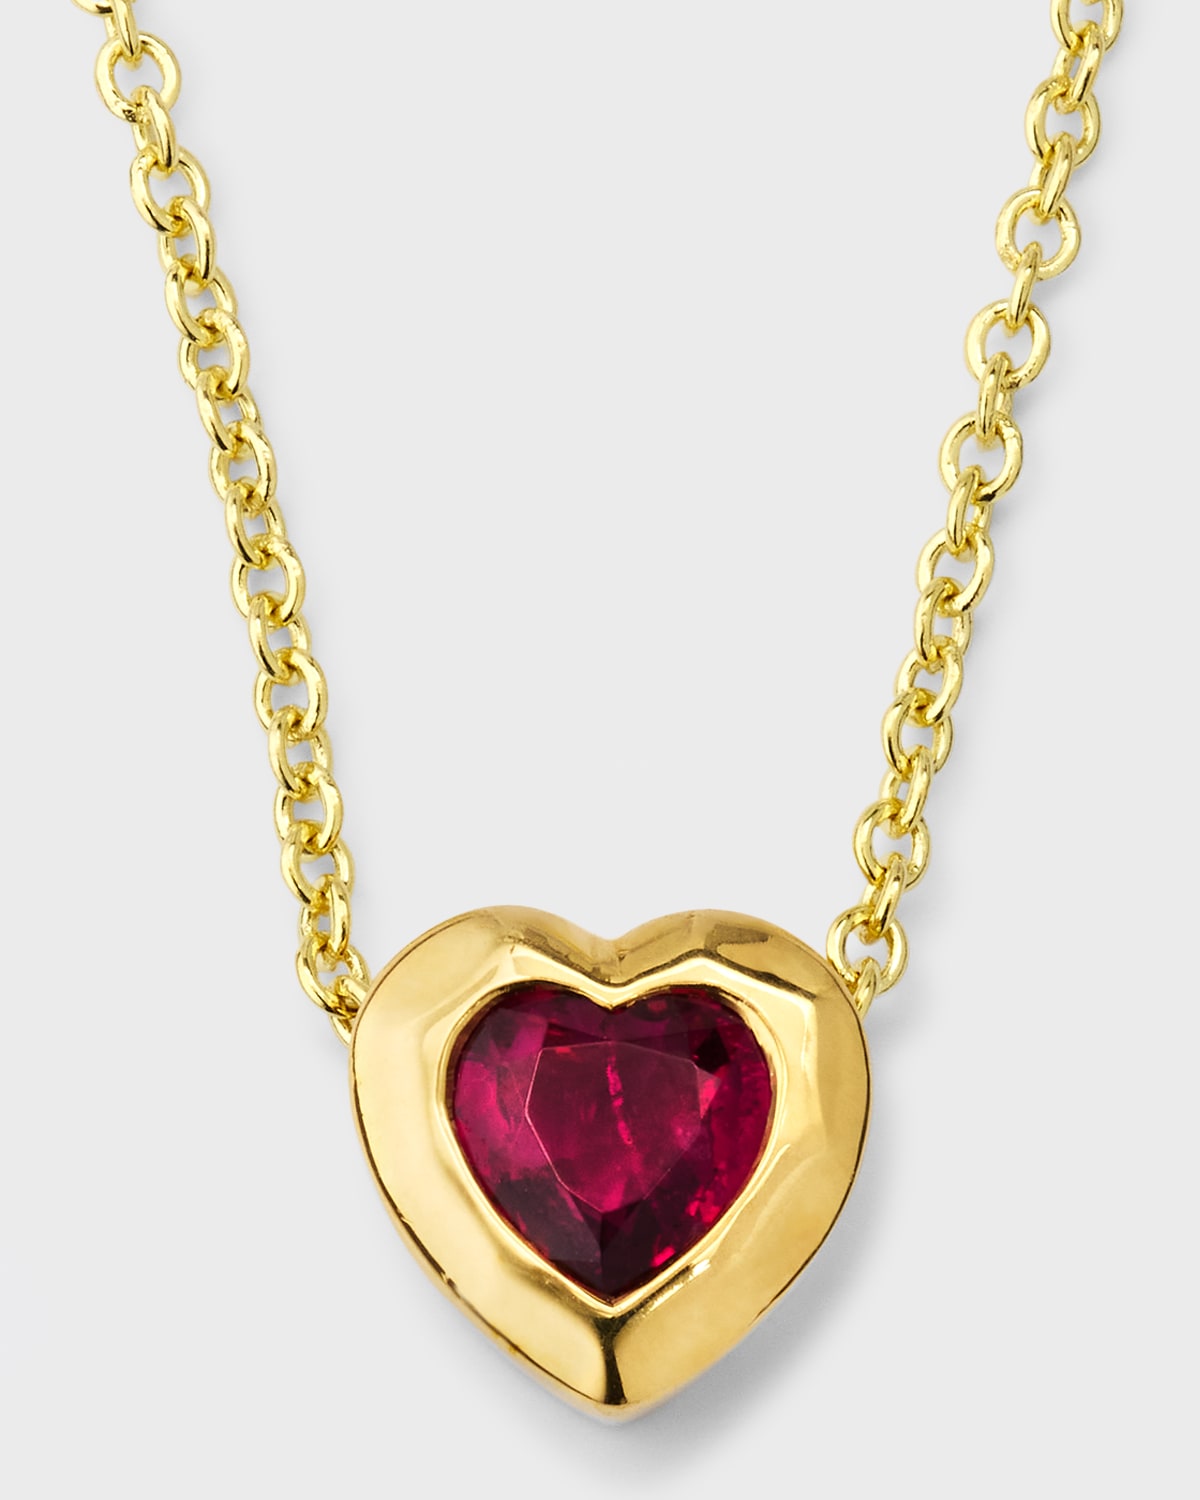 18K Rock Candy Caramella Heart Pendant in Rubellite, 16-18"Lches